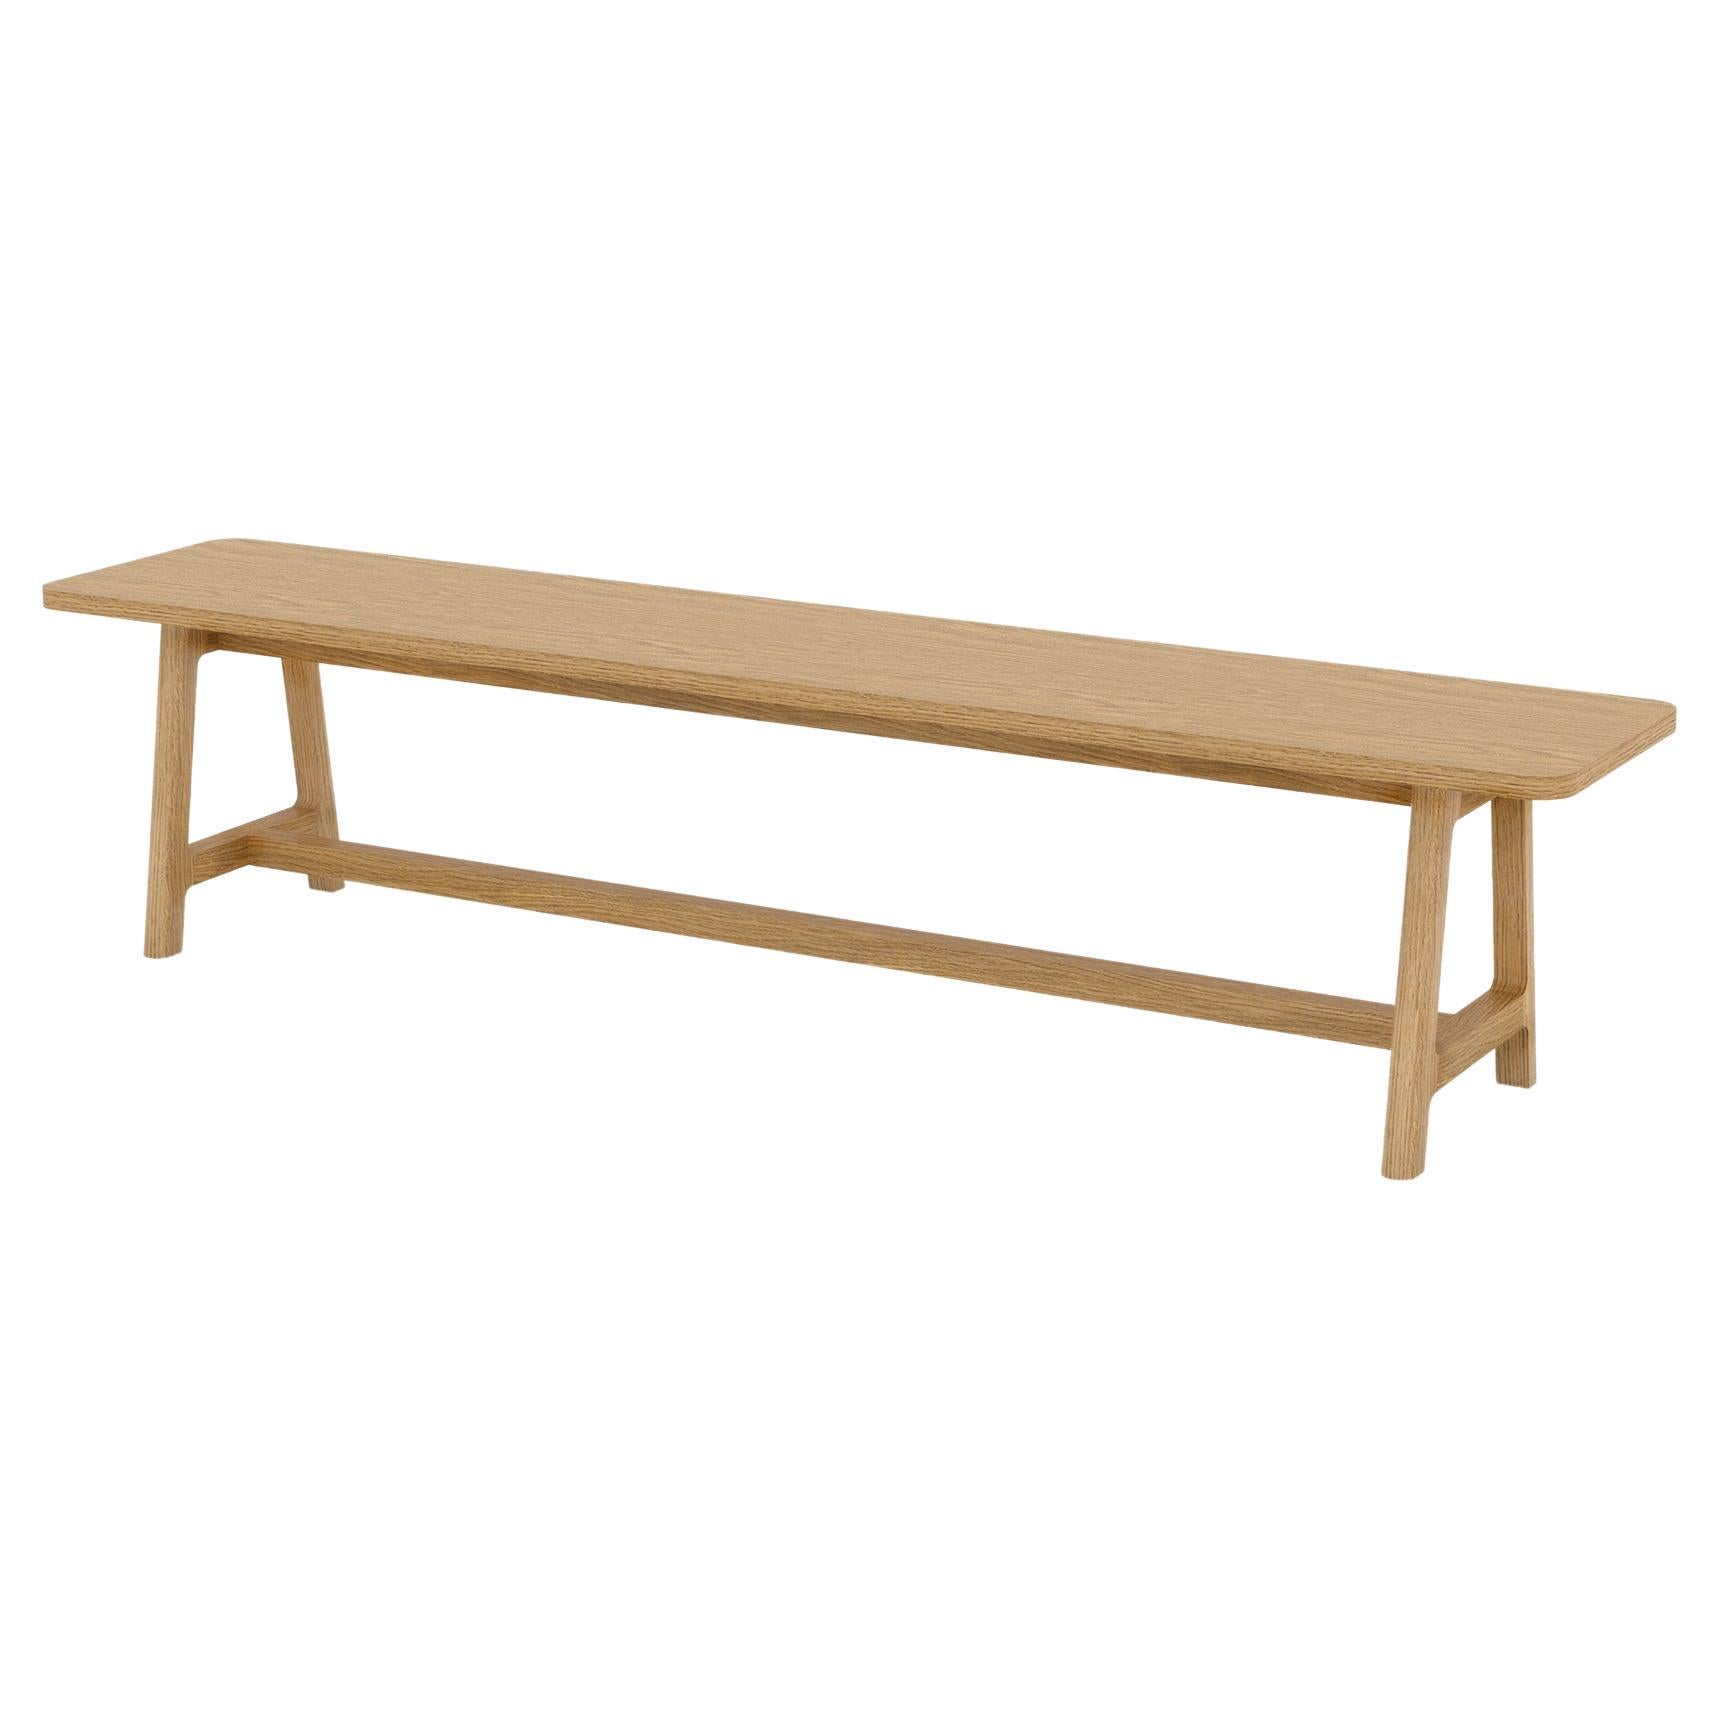 Minimalist Modern Bench in Oak Wood Frame Collection For Sale